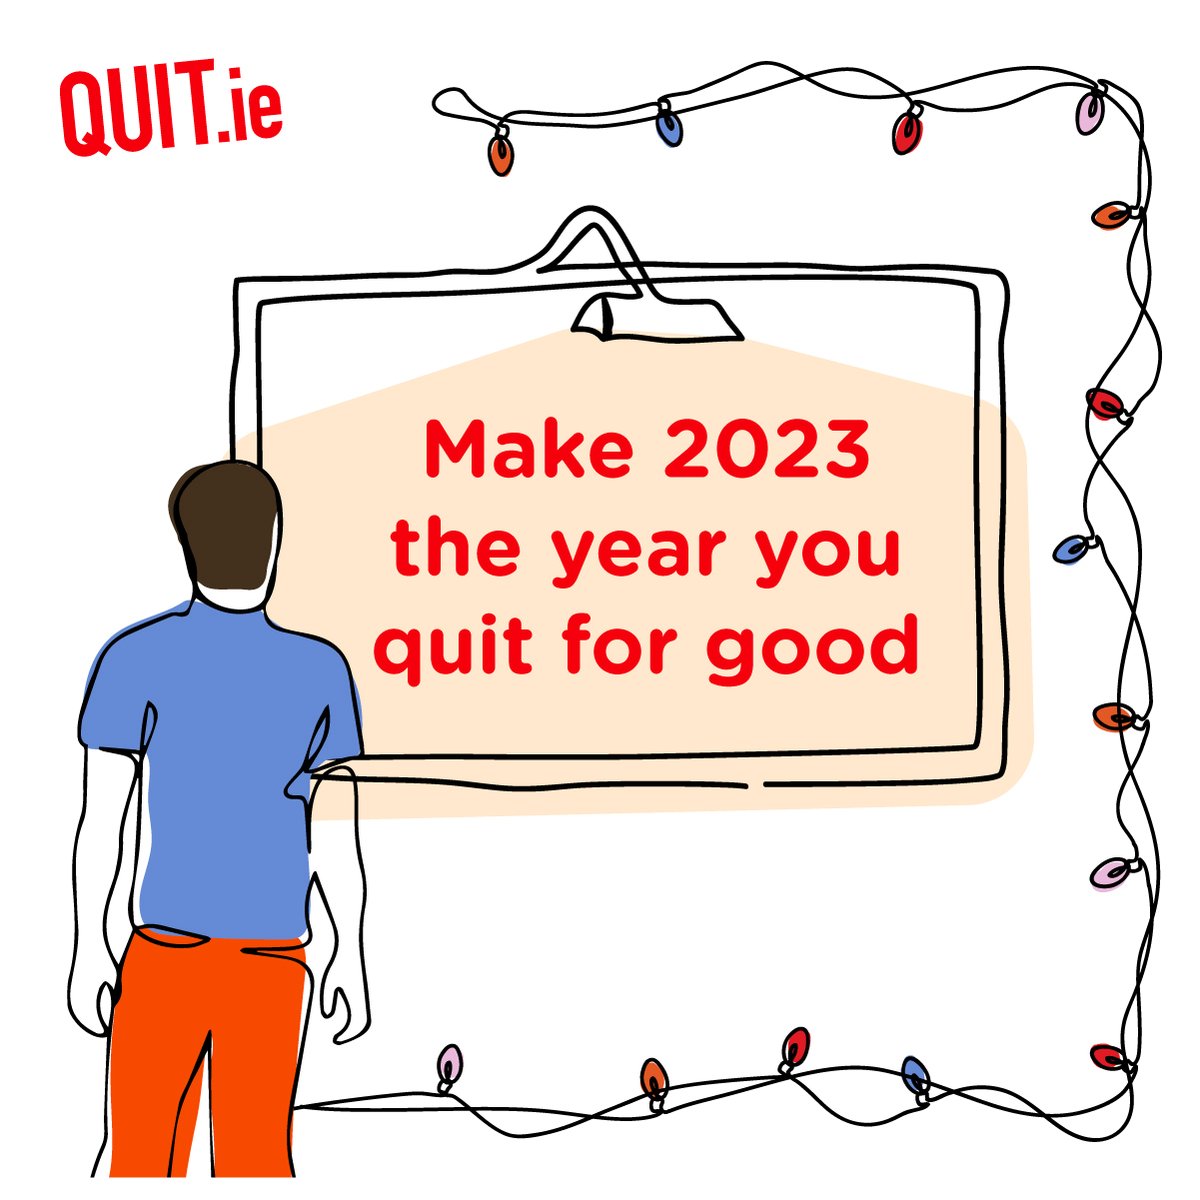 Planning for the year ahead? Quitting smoking is one of the most important things you can do to improve your health and quality of life. You don’t have to do it alone. Get support here bit.ly/3UPTo7B QuittingIsWinning #QuitSmoking #SmokeFree #2023